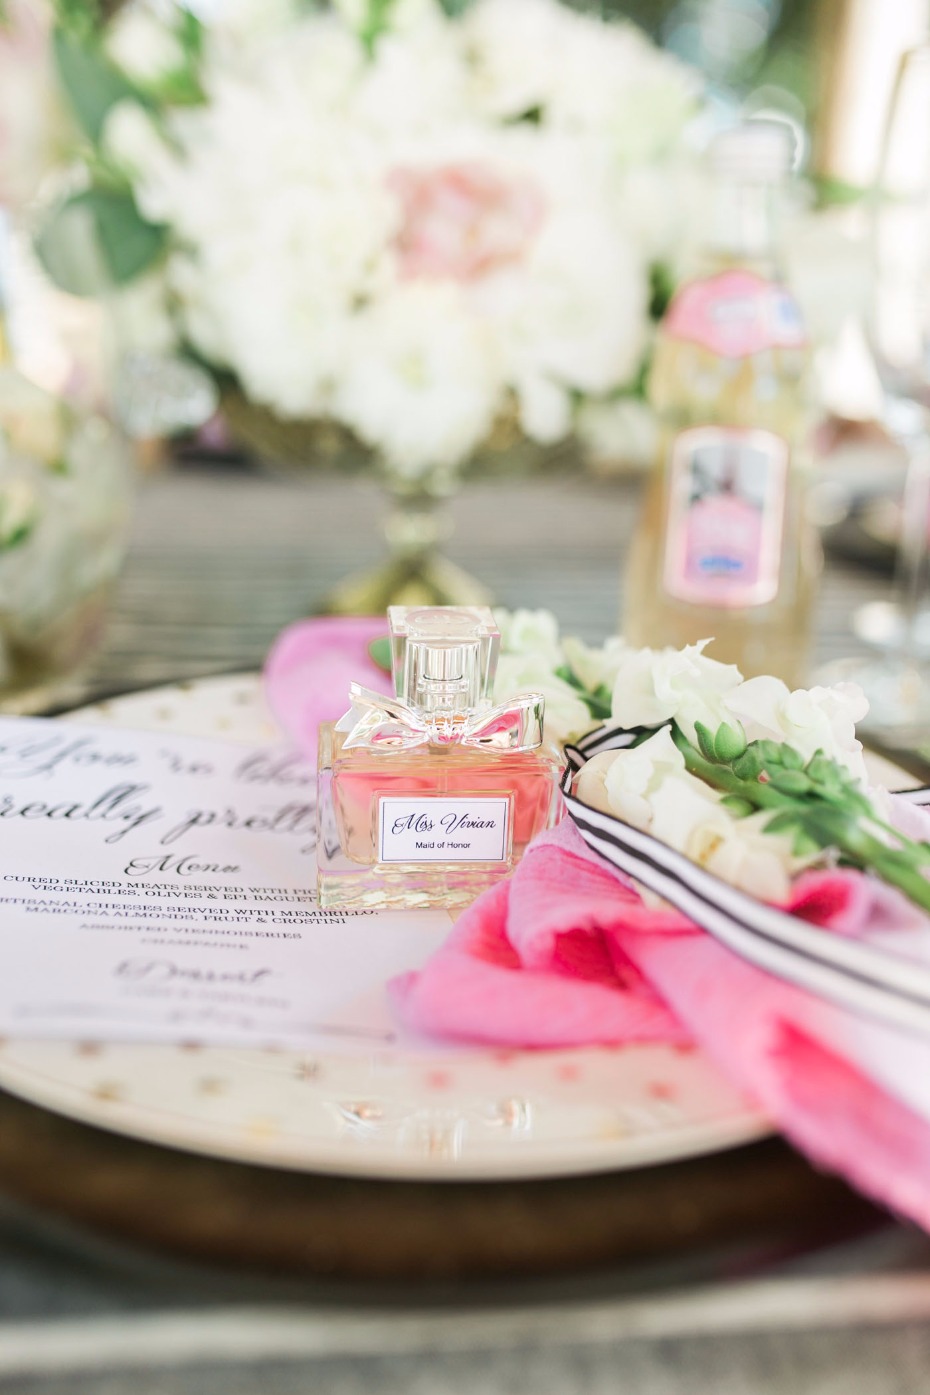 Perfume bottle favors with custom labels